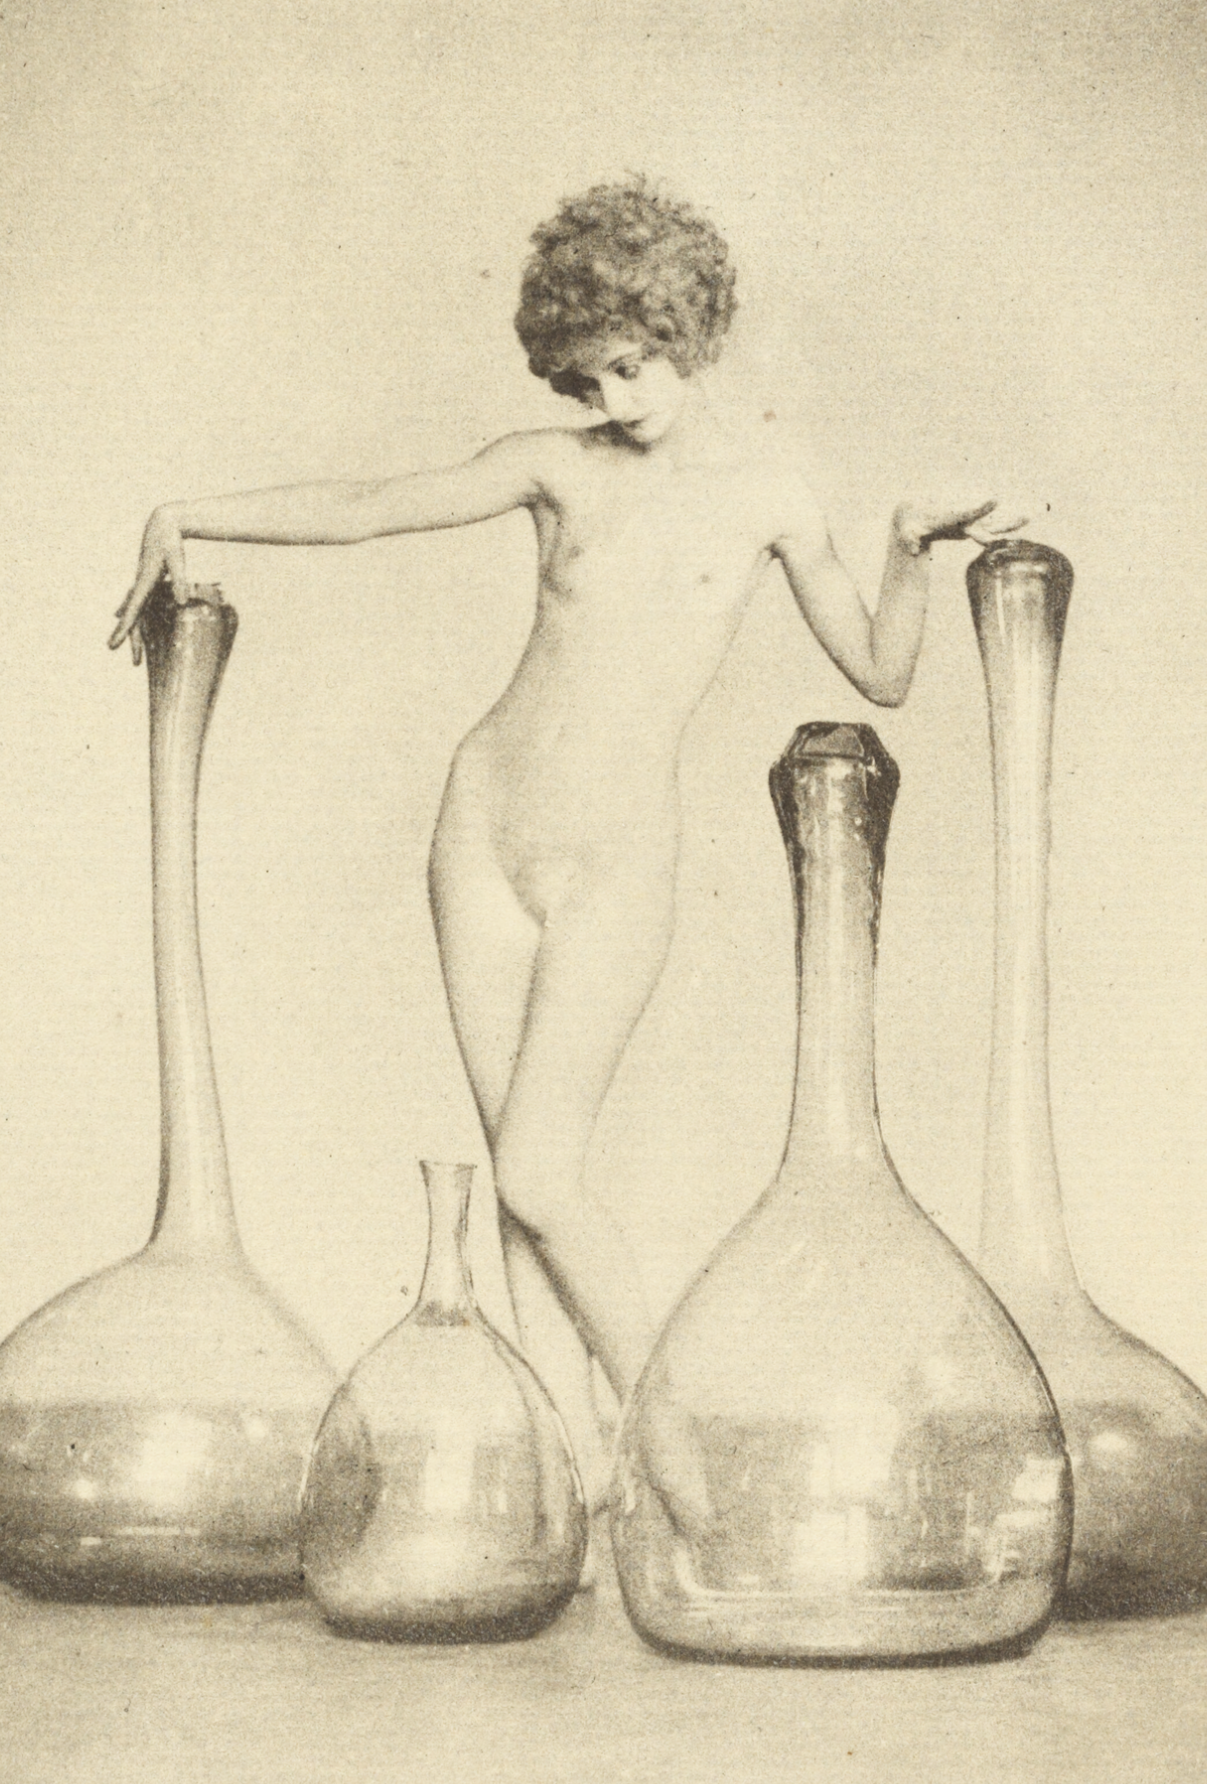 Nude woman and Glass by Arthur F. Kales c.1926 - Postcard